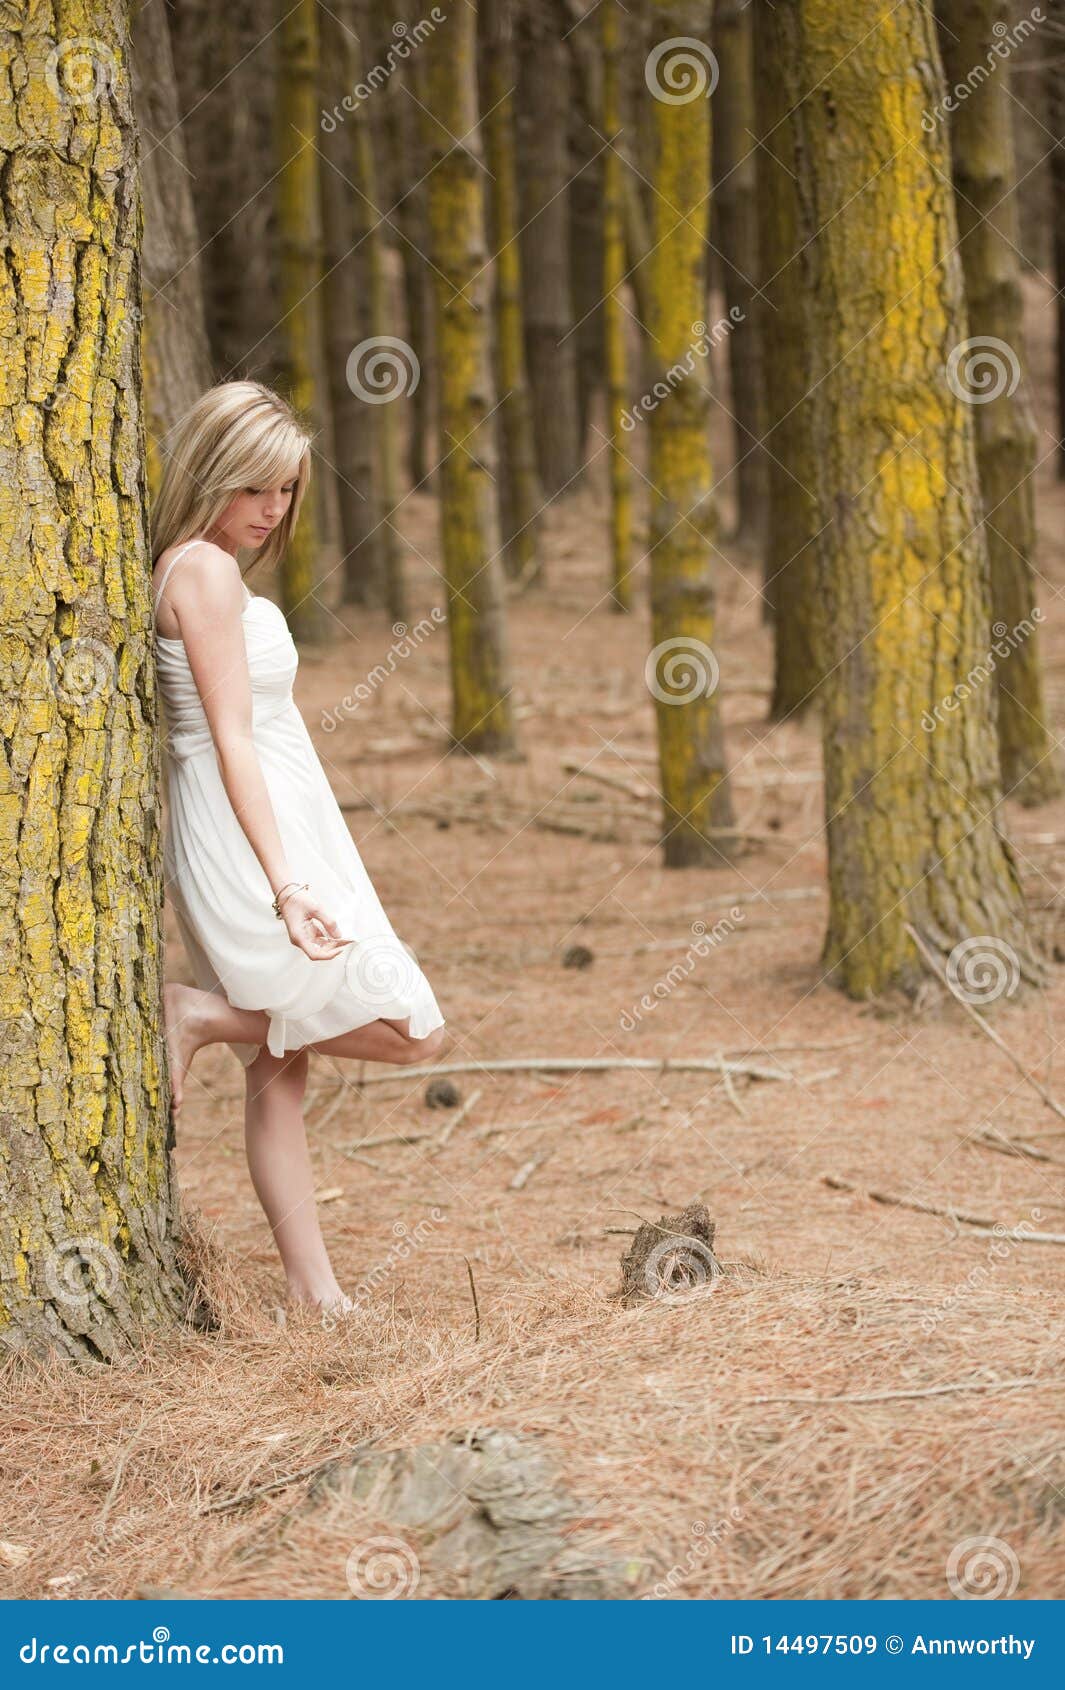 Blonde teen babe Gorgeous Blonde Teen Girl In Forest Stock Image Image Of Nature Outdoors 14497509